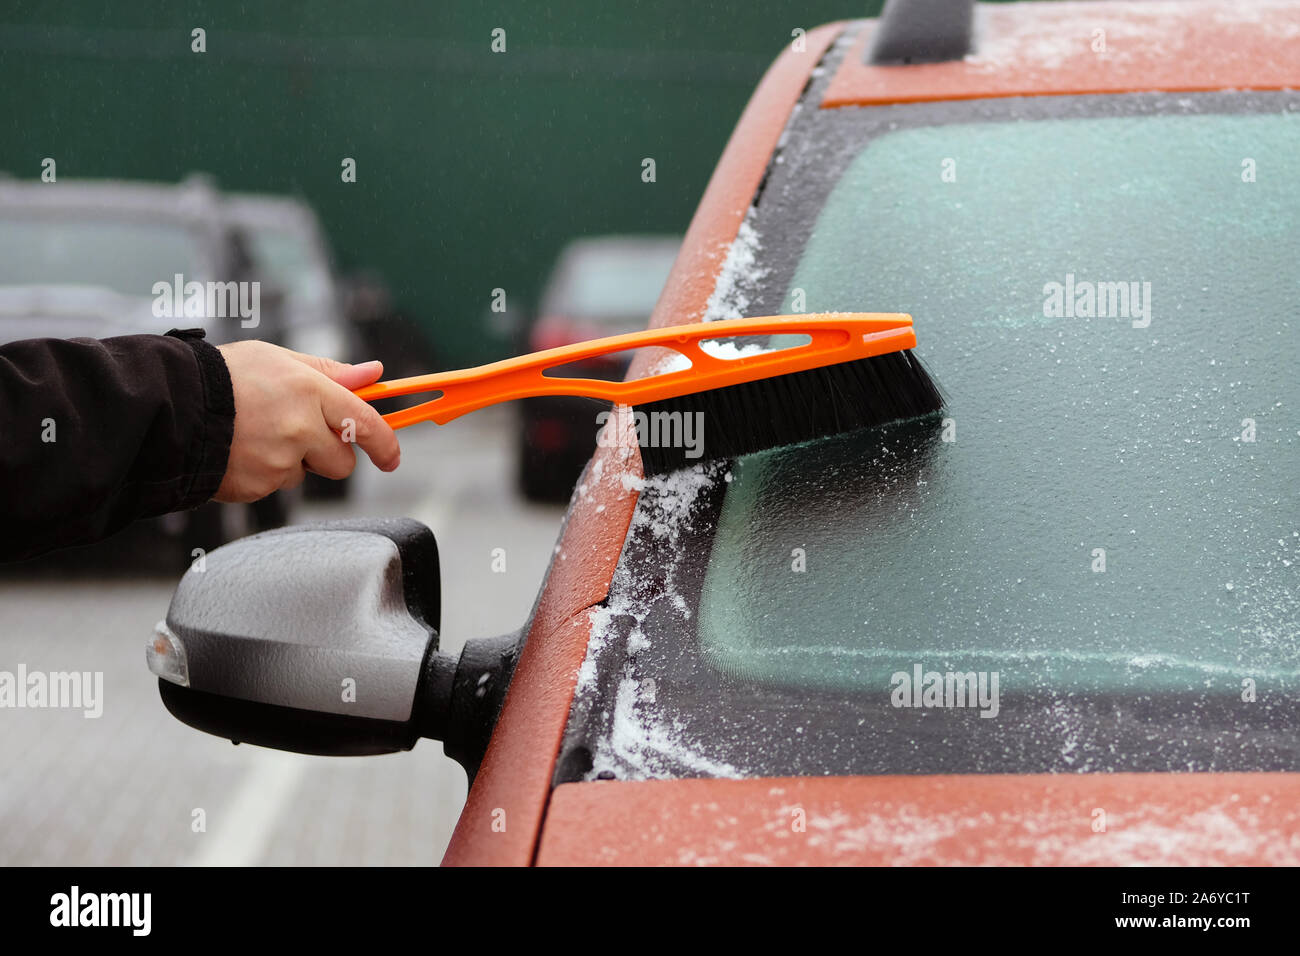 Brush in mans hand. Man clears snow from icy windshield of orange car. Man is brushing automobile window. Stock Photo